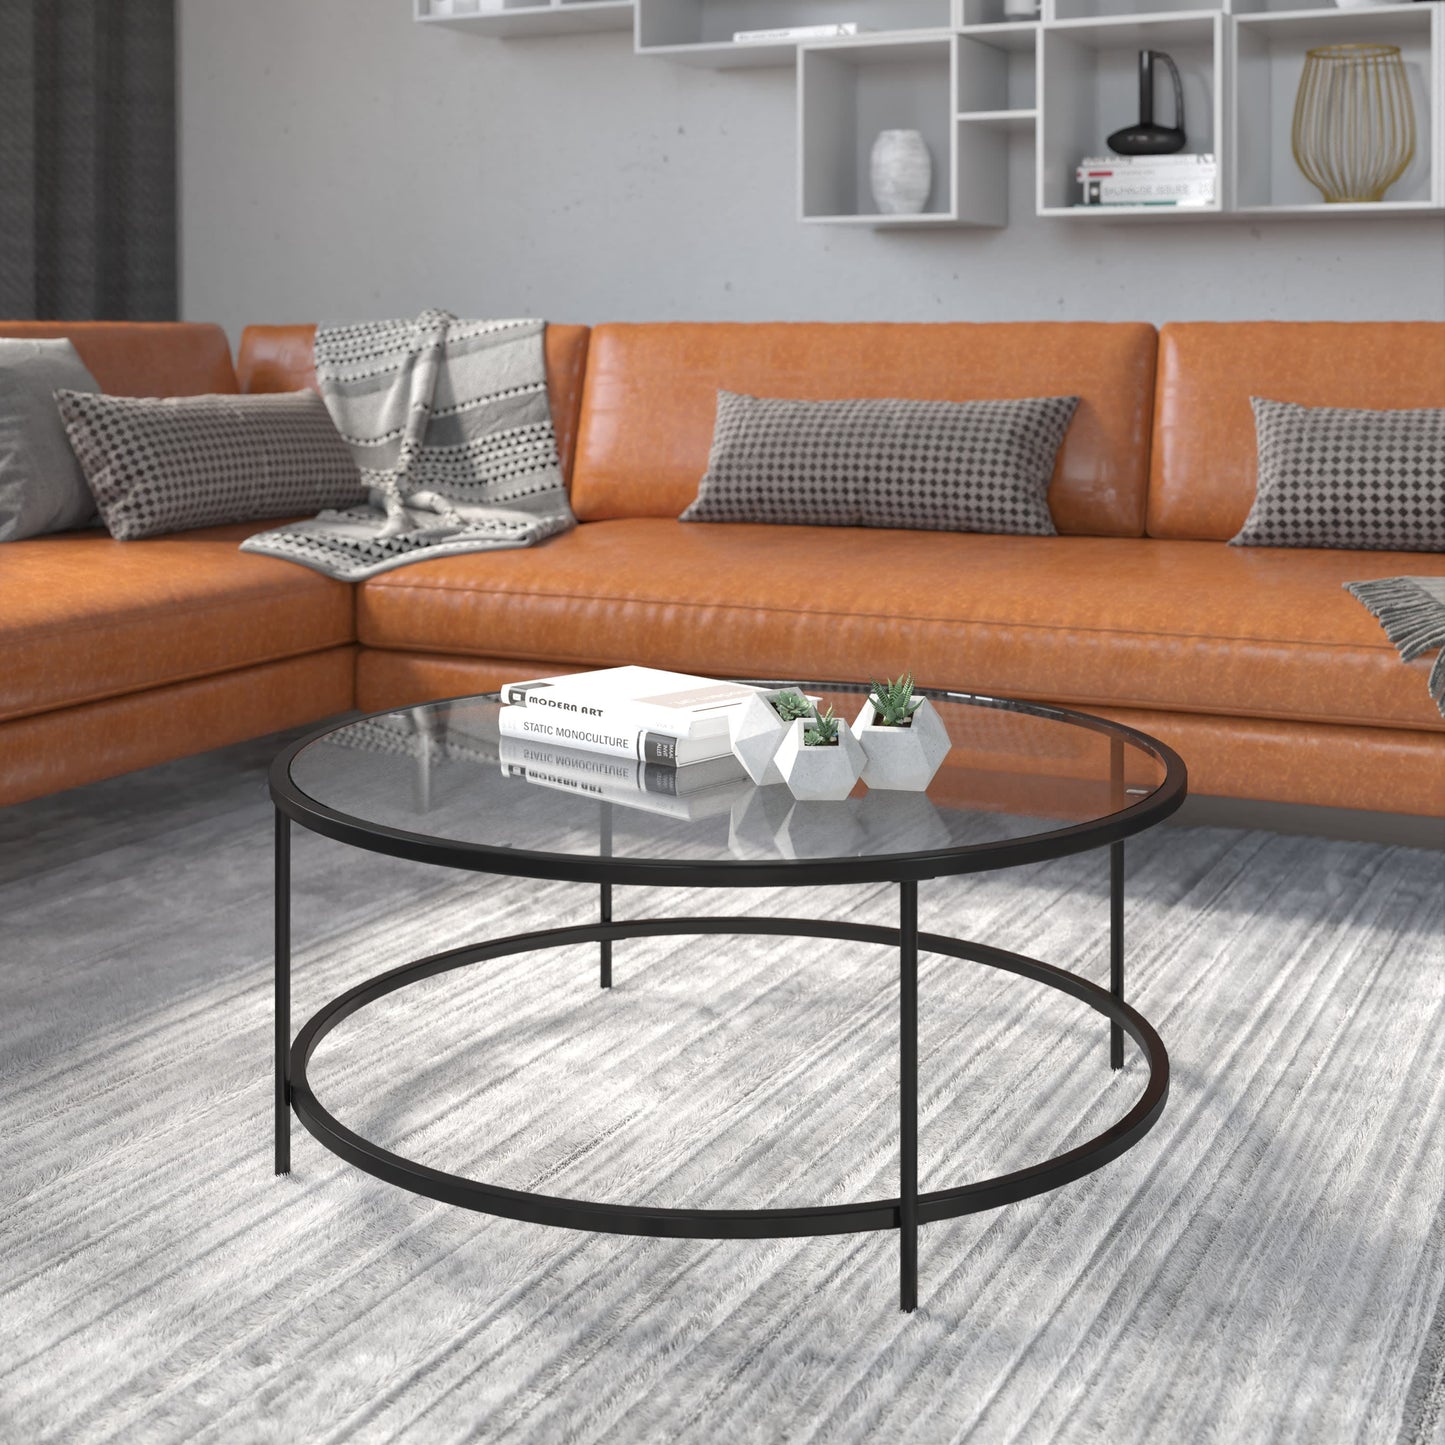 Luxury Coffee Table For Living Room